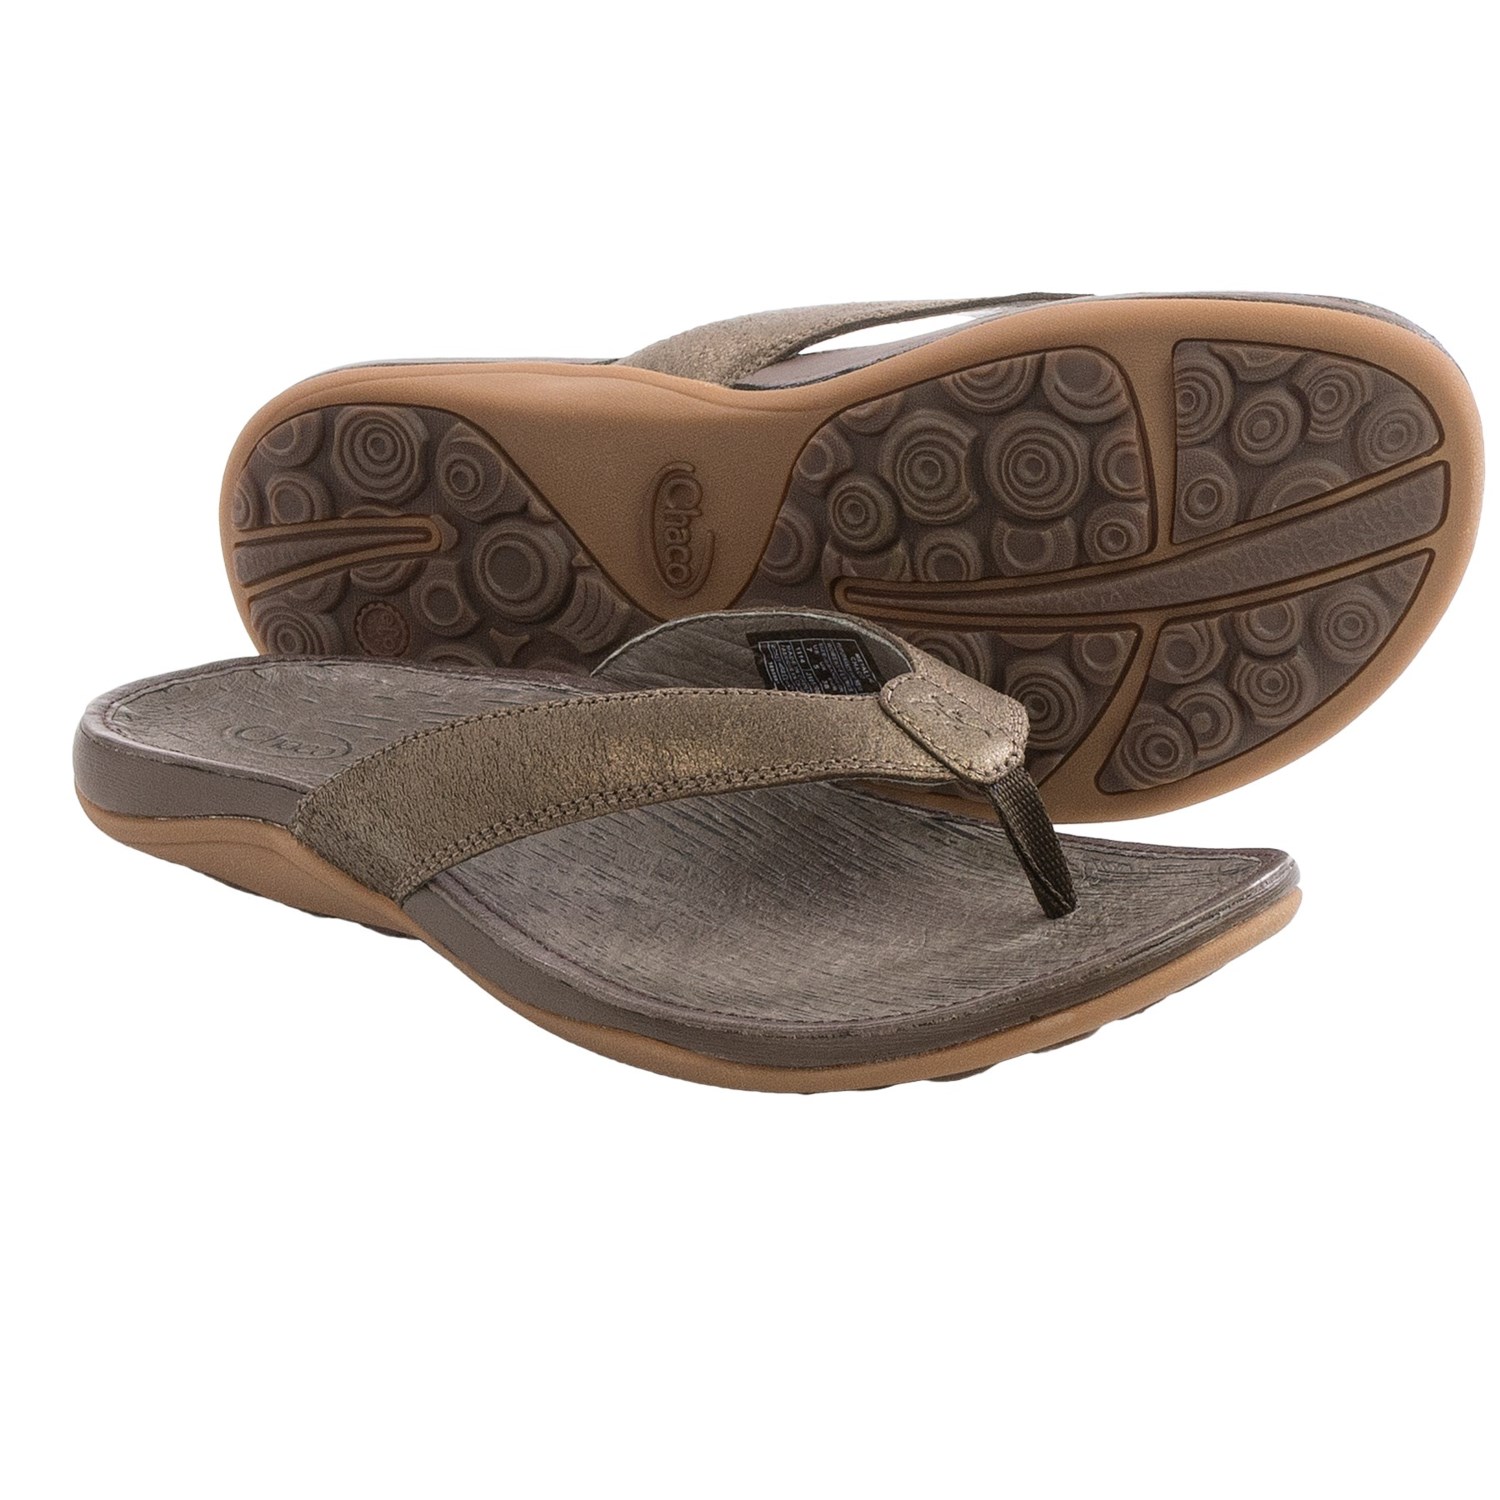 Chaco Sol Flip-Flops (For Women) - Save 37%